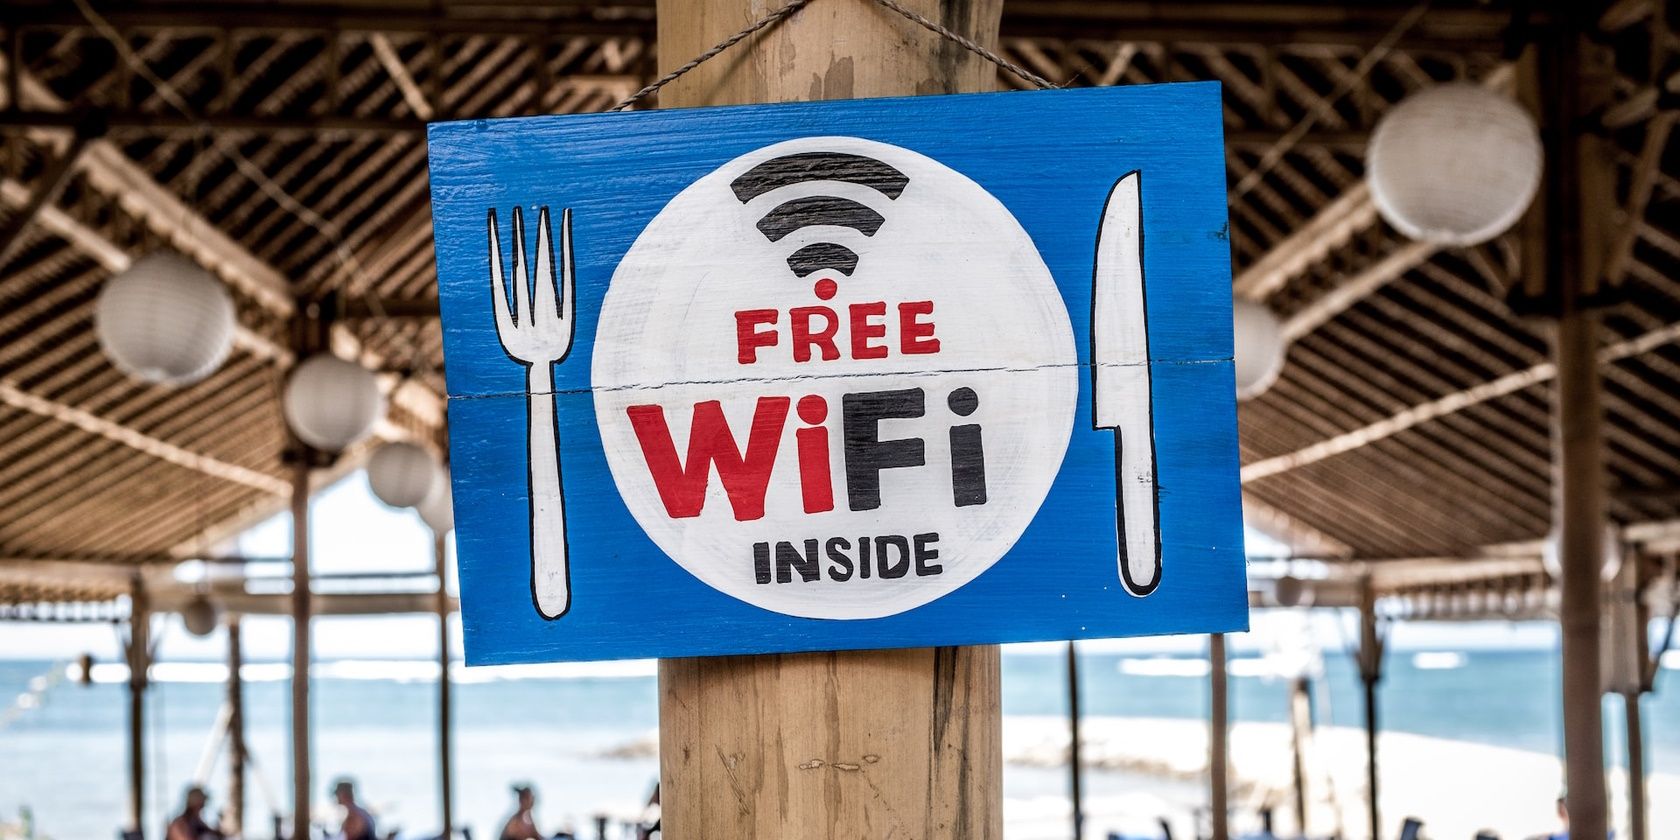 is-free-wi-fi-safe-featured-image.jpg